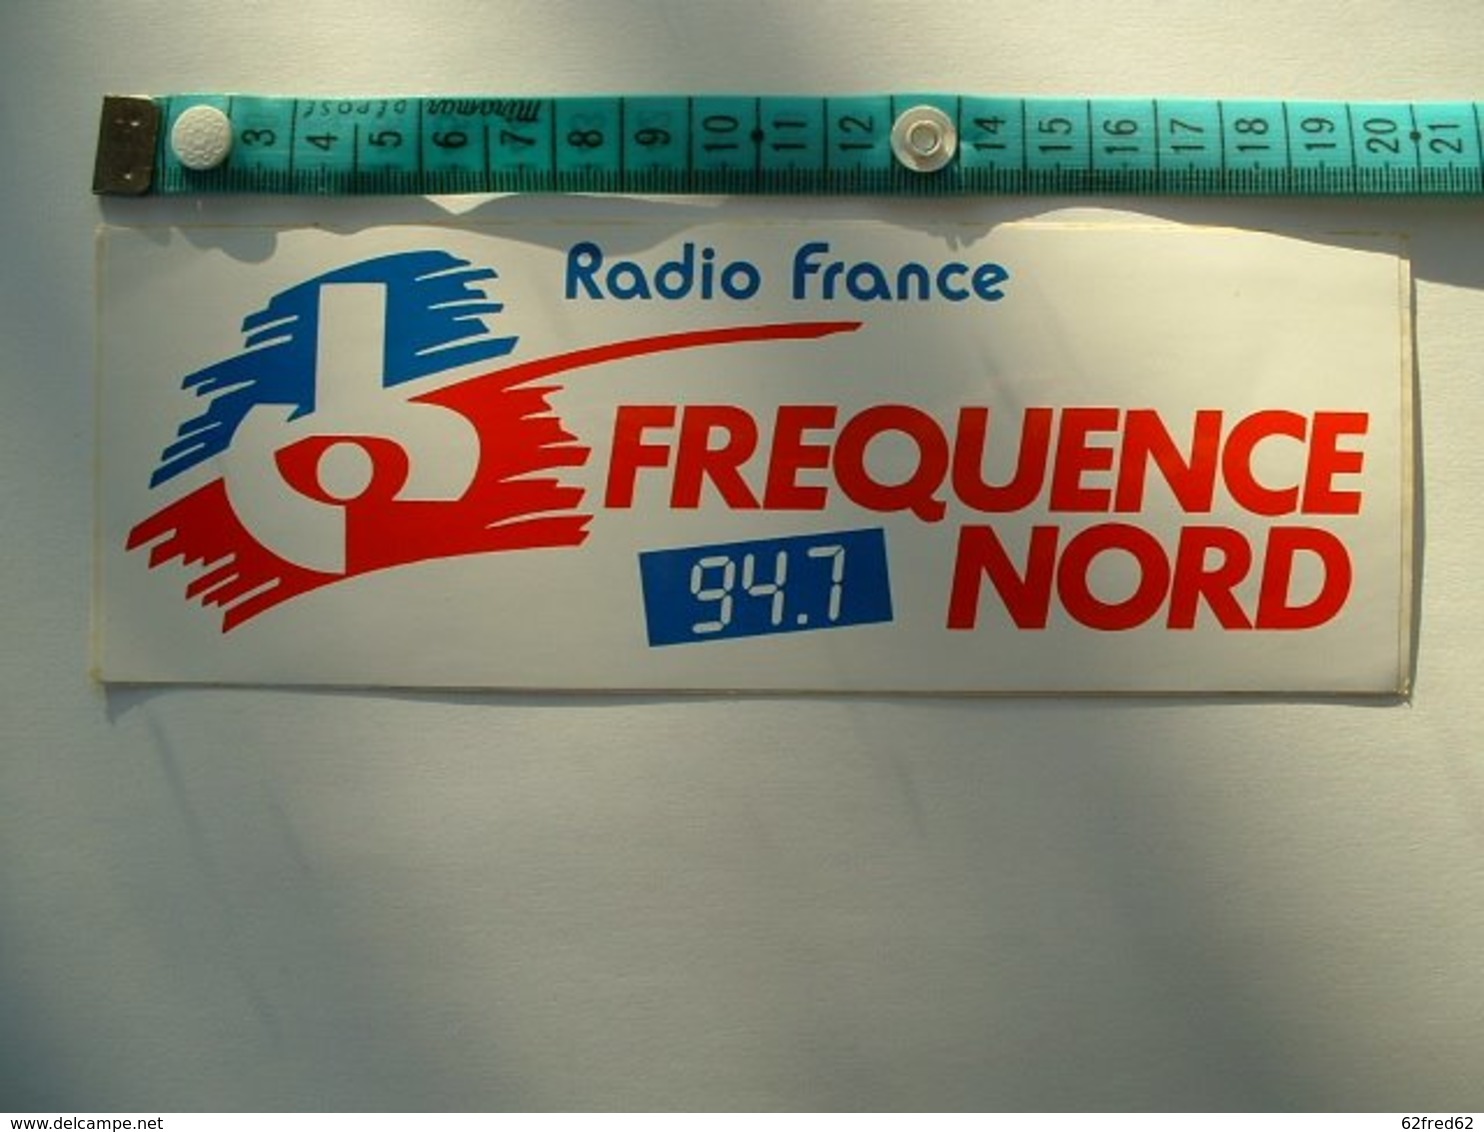 AUTOCOLLANT RADIO FRANCE FREQUENCE NORD - Aufkleber